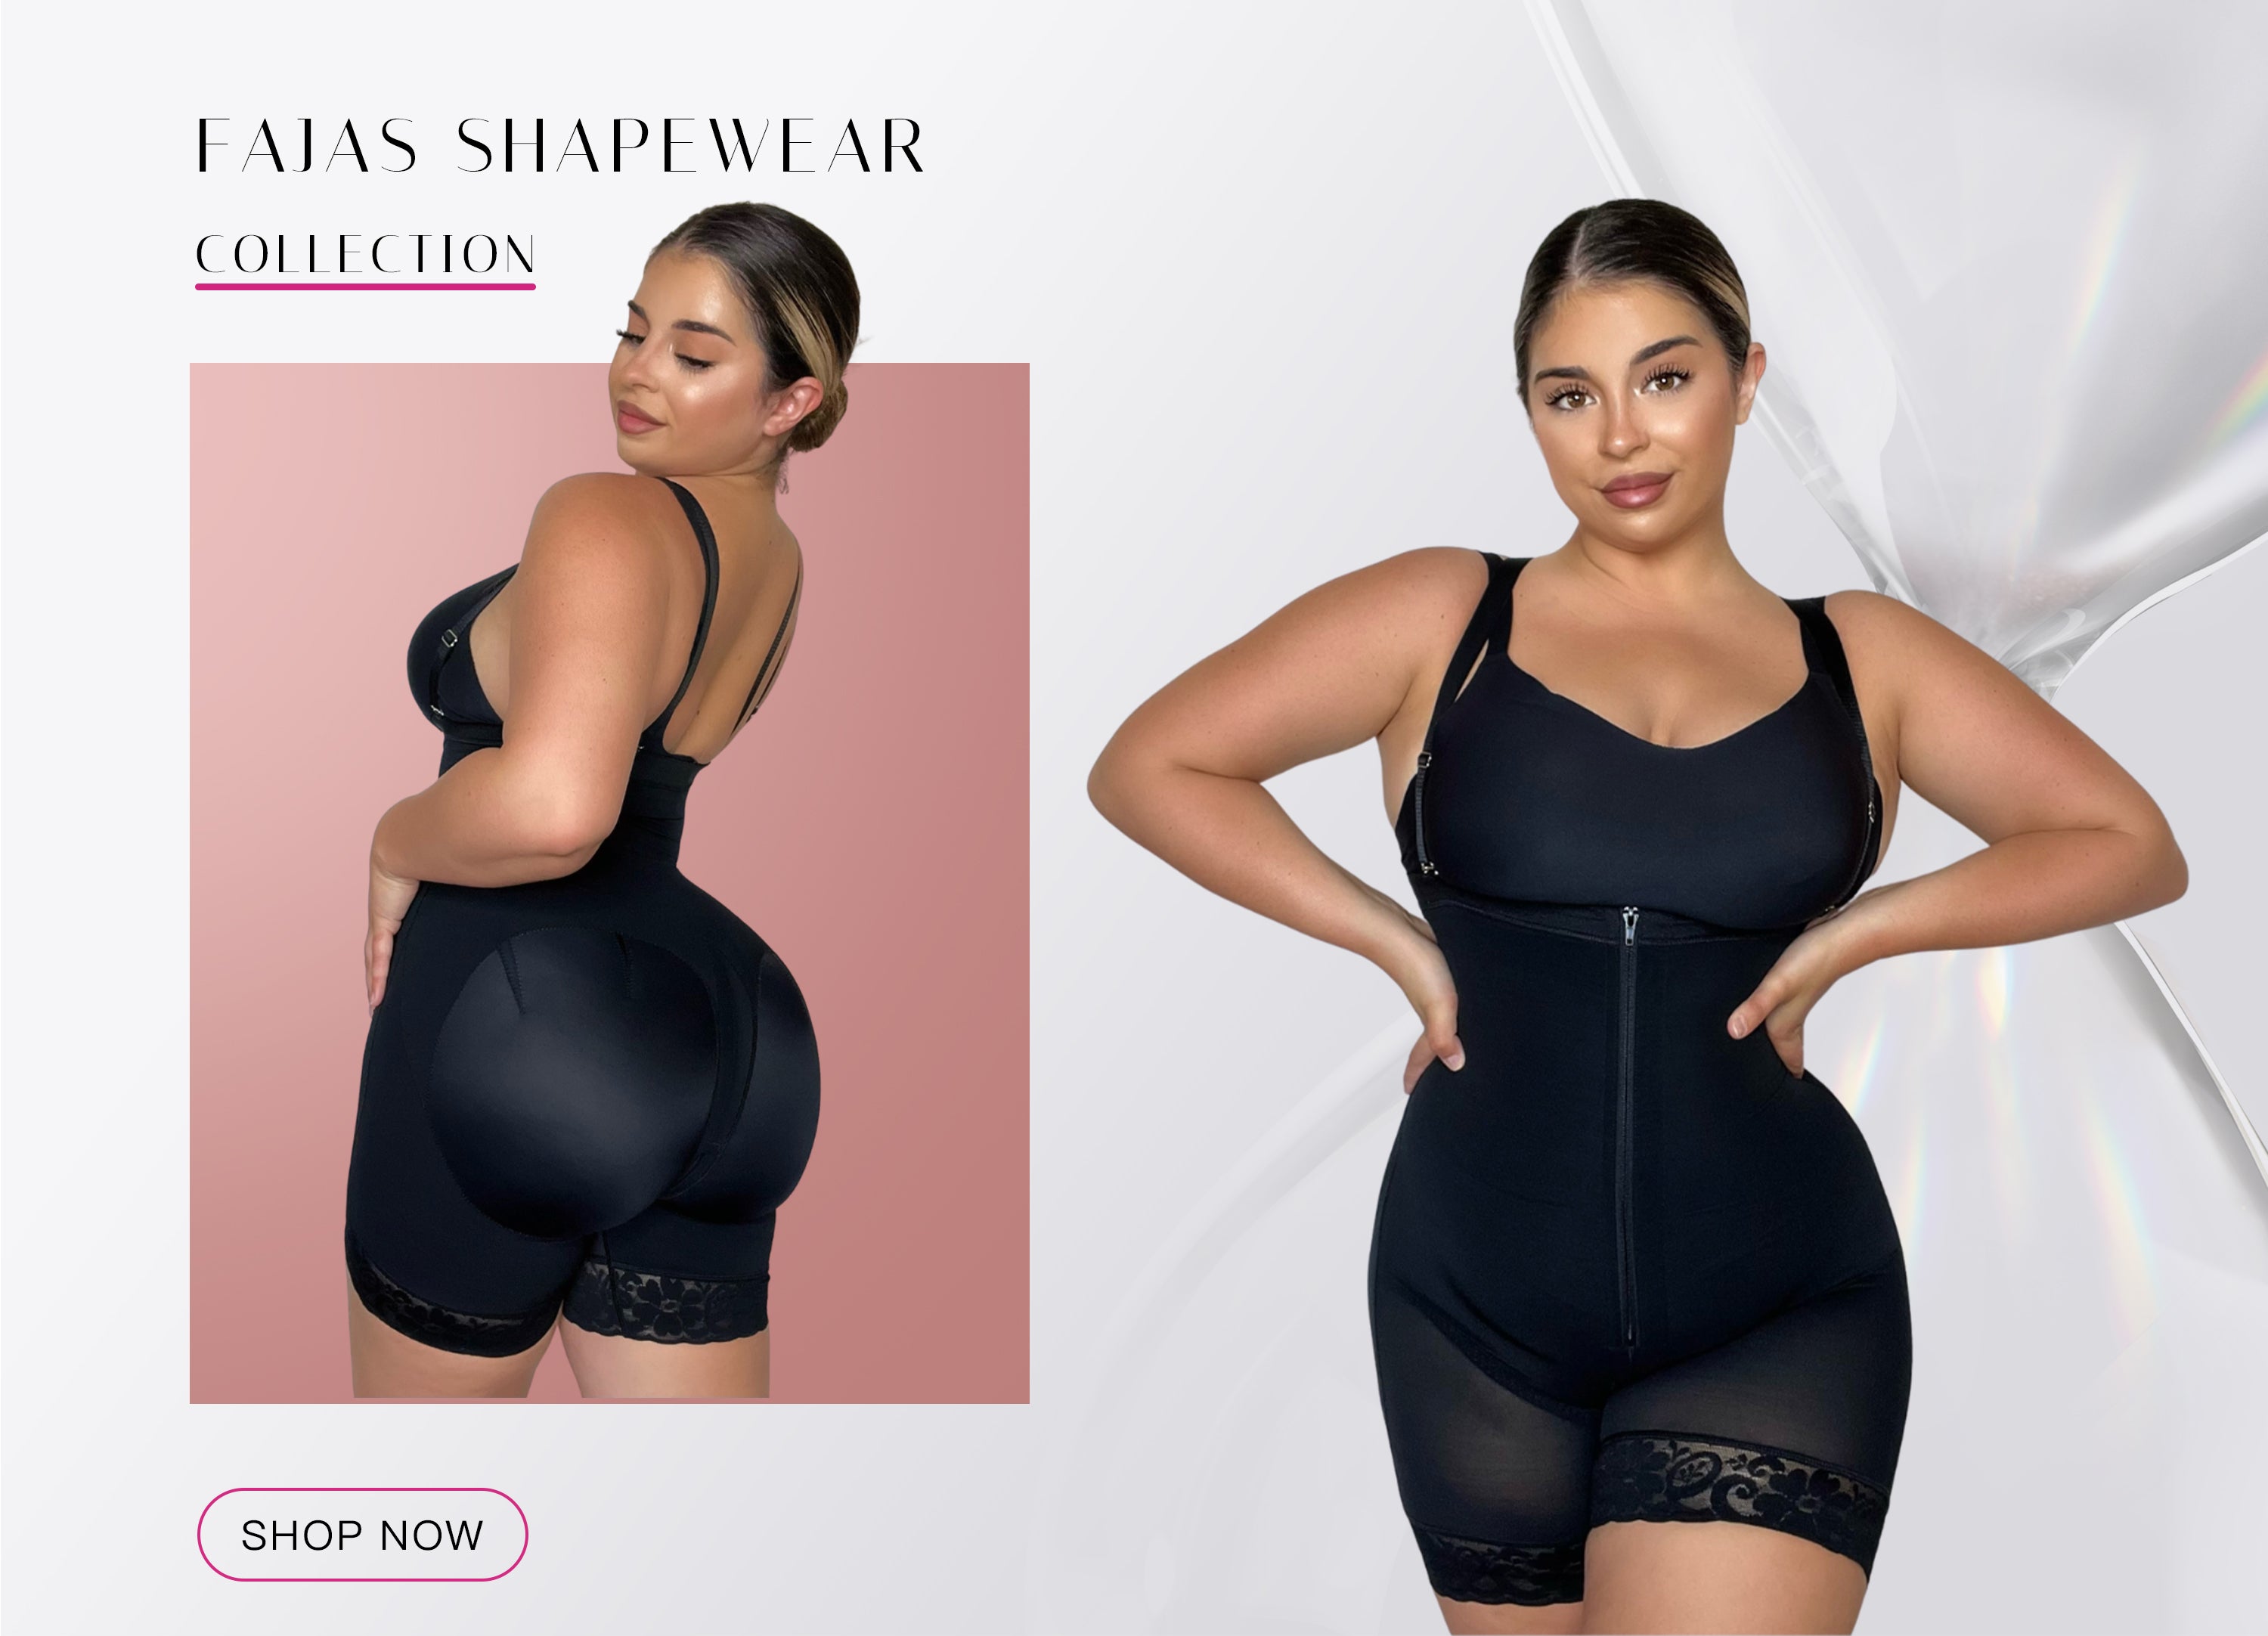 Styles YIANNA shapewear - with casual and dresses to wear this